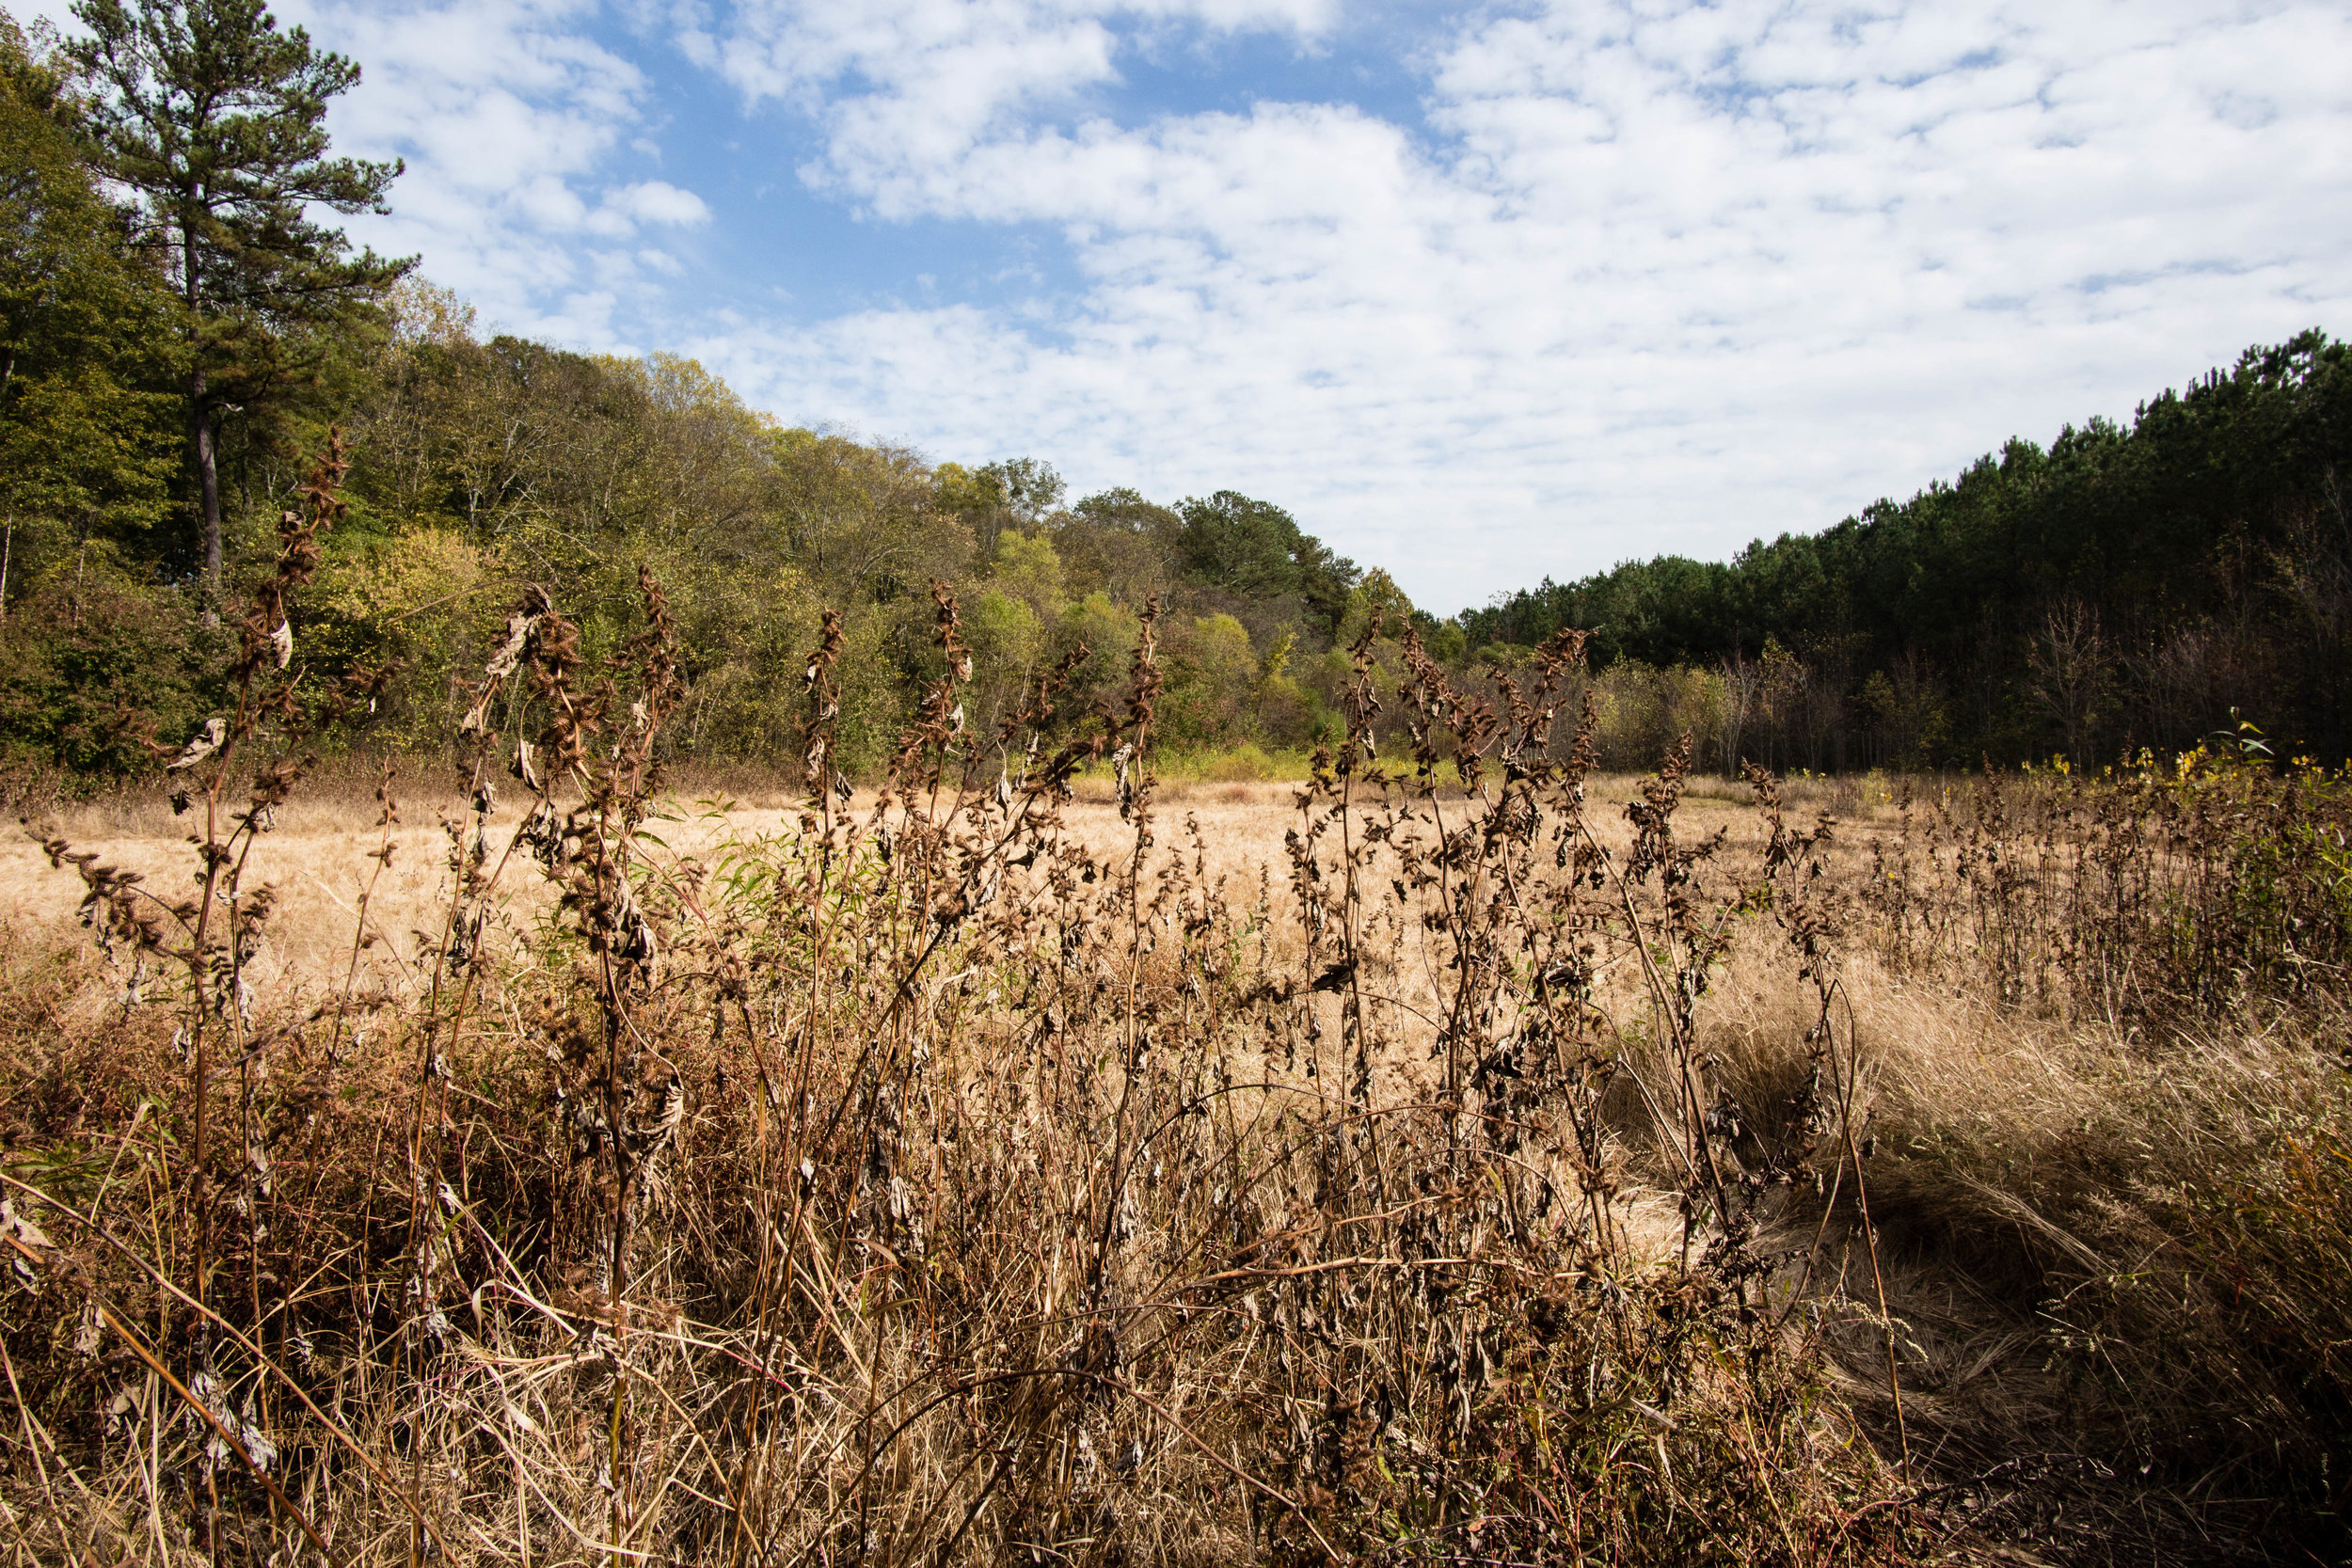 Inside the beaver pond during the drought, November 12, 2016